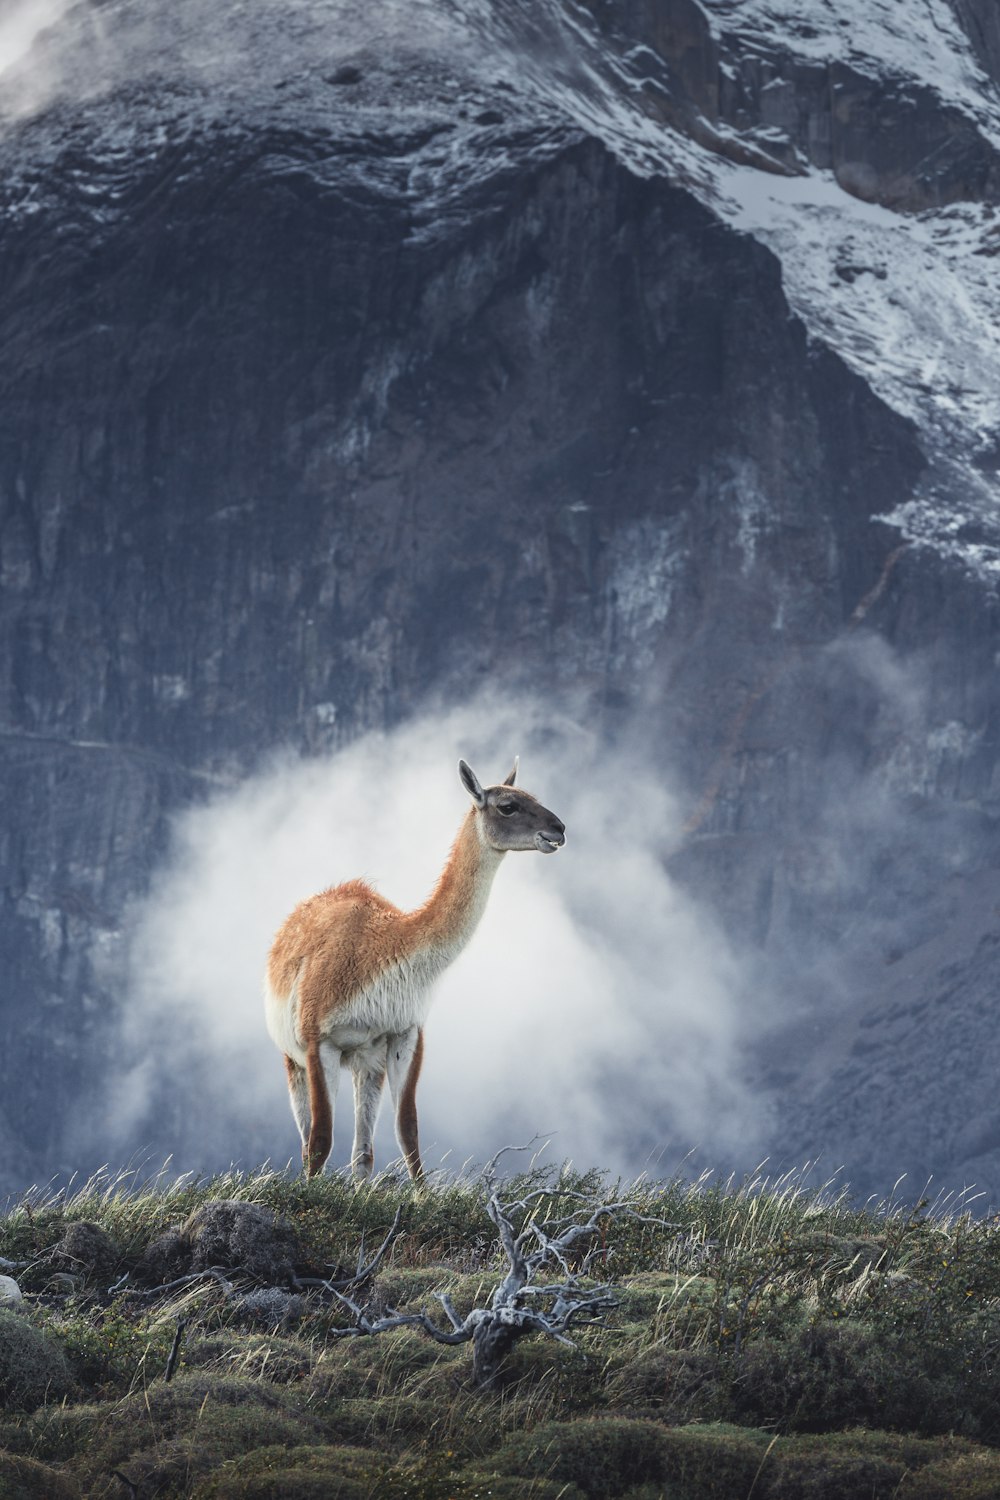 a llama standing on top of a grass covered hill